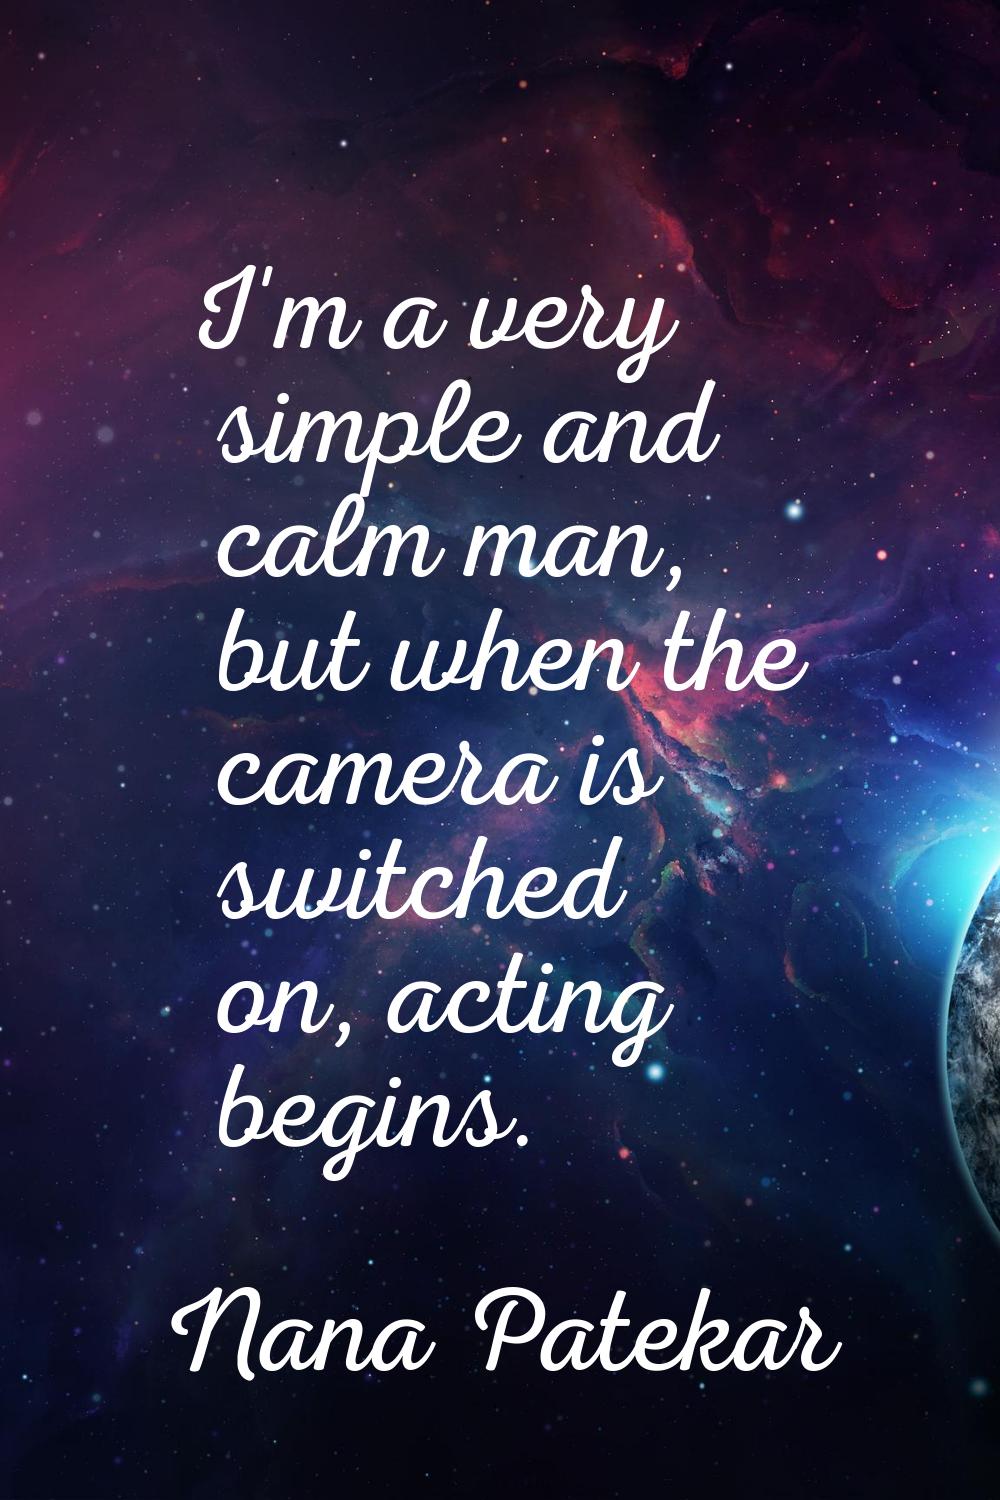 I'm a very simple and calm man, but when the camera is switched on, acting begins.